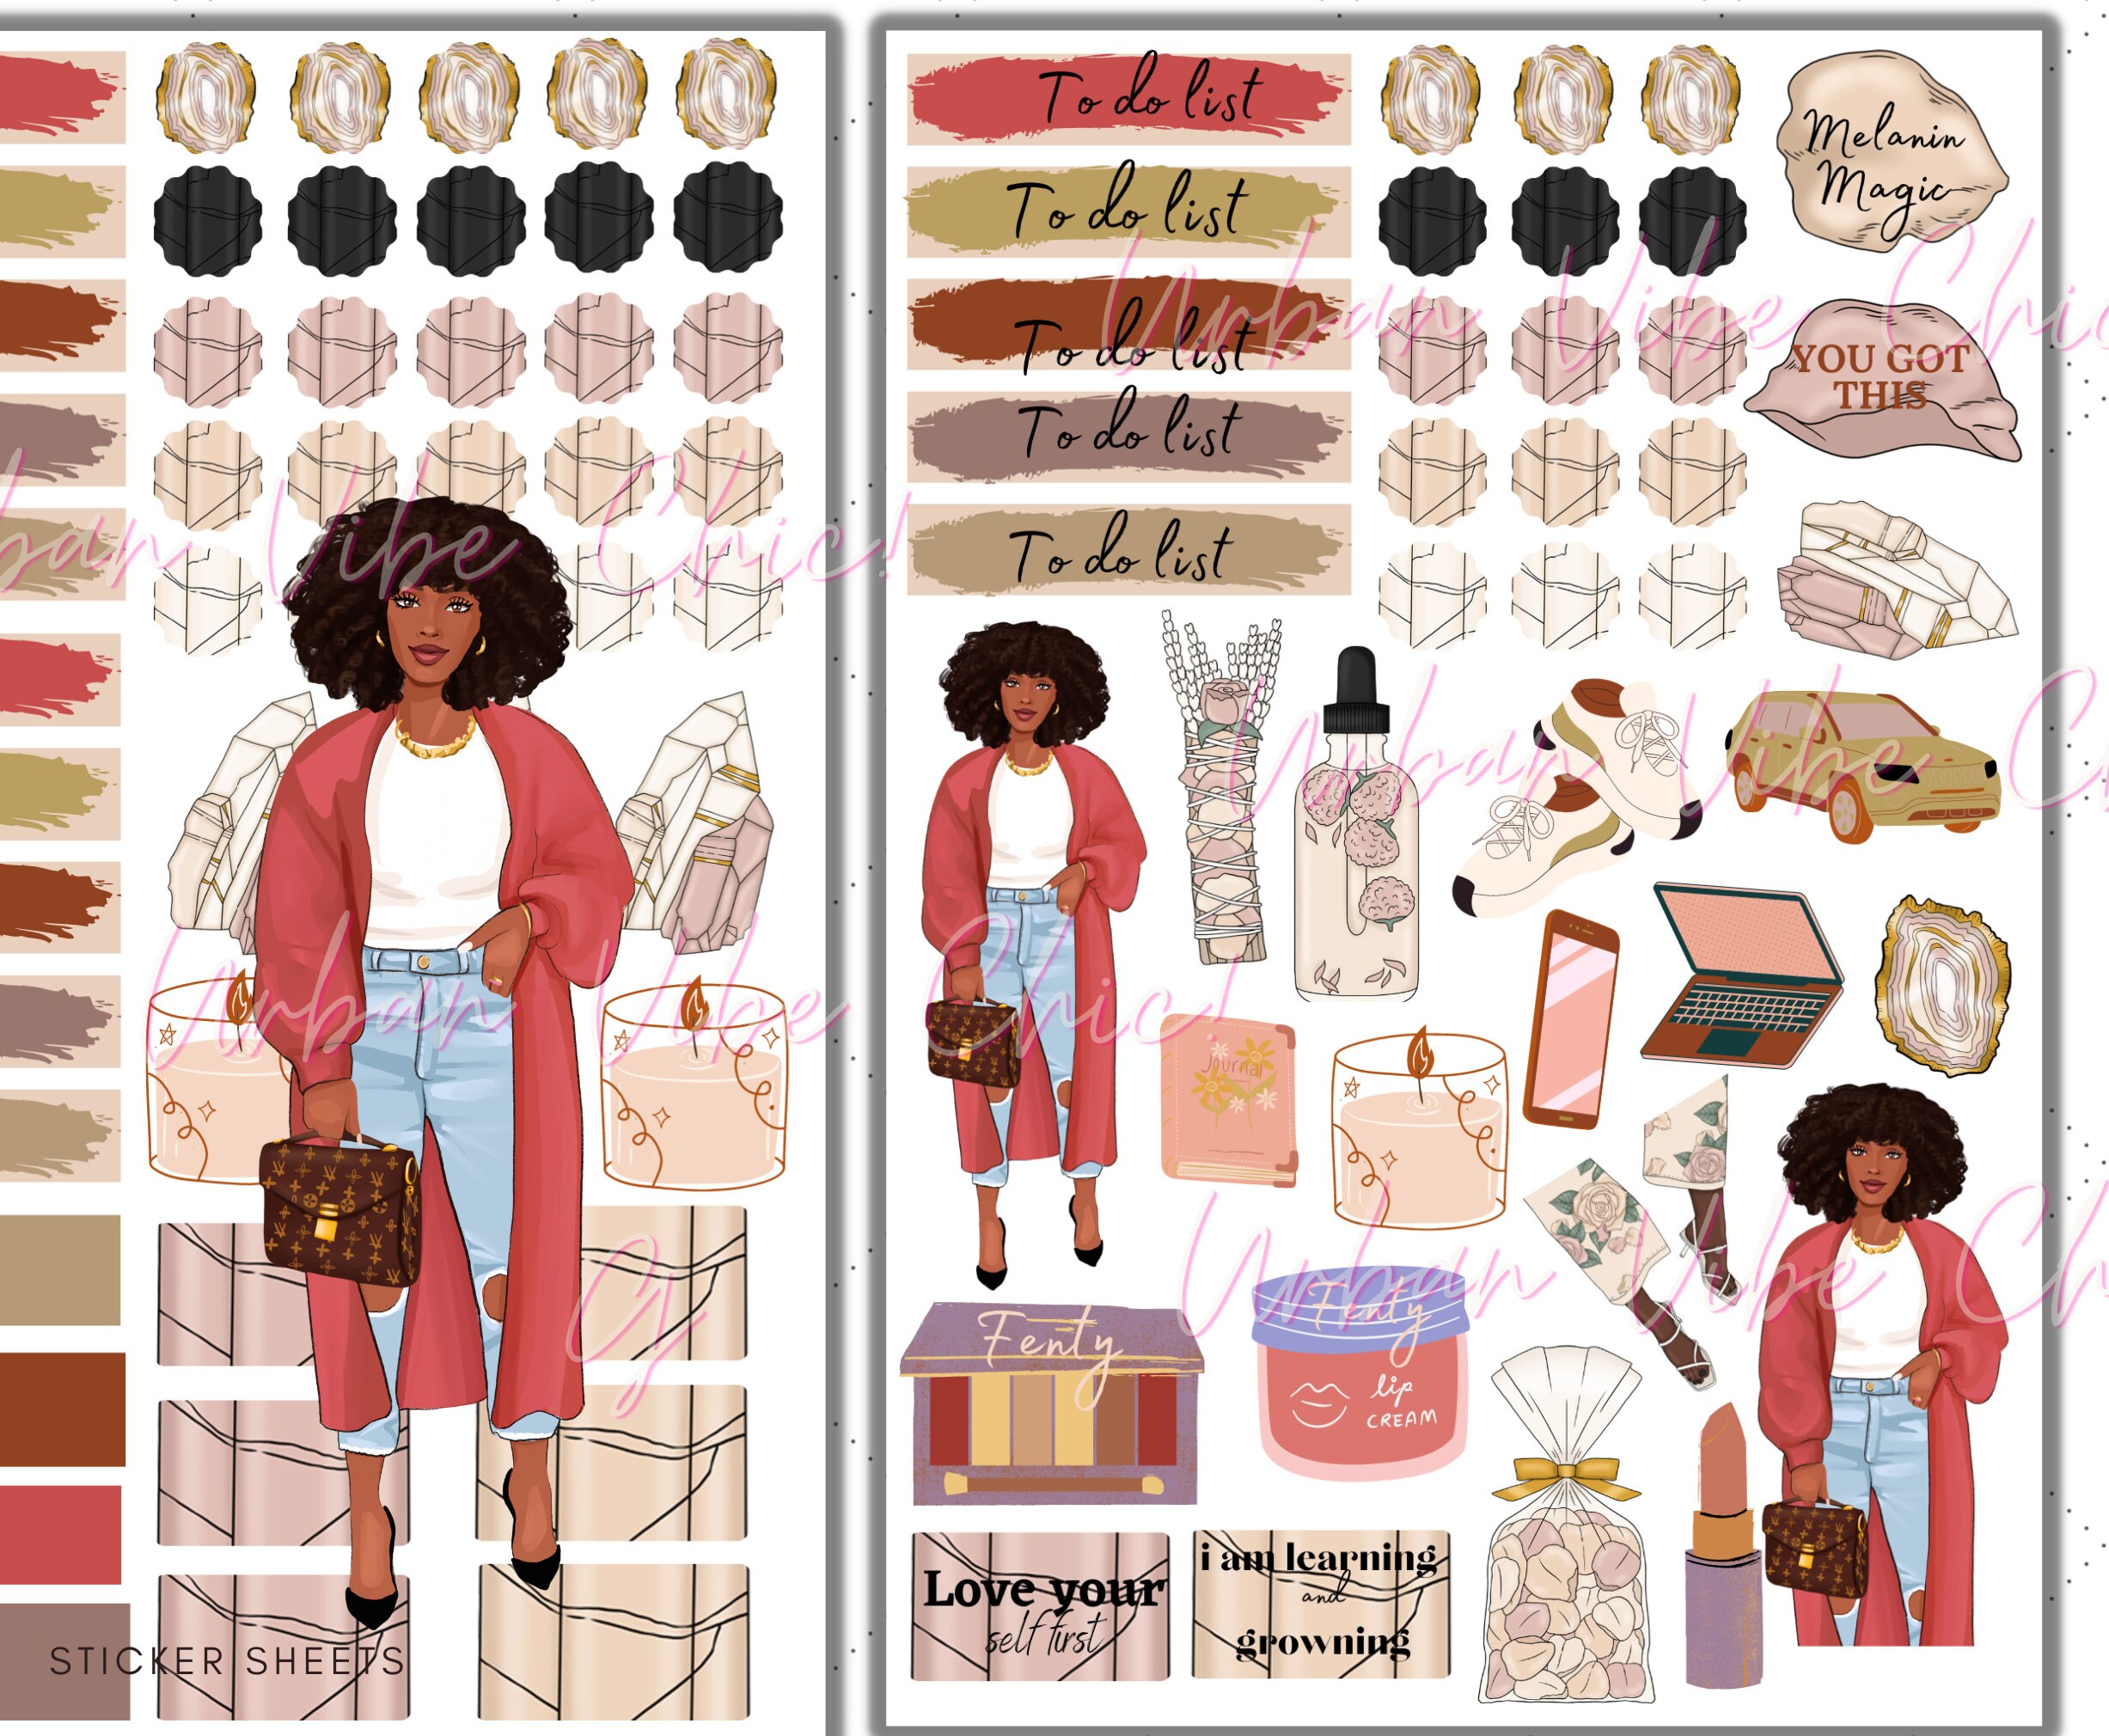 Black Girl Planner Stickers, Black Women, African American Planner Sticker, Planners  Stickers, Black Owned, Affirmation Stickers, Stickers 